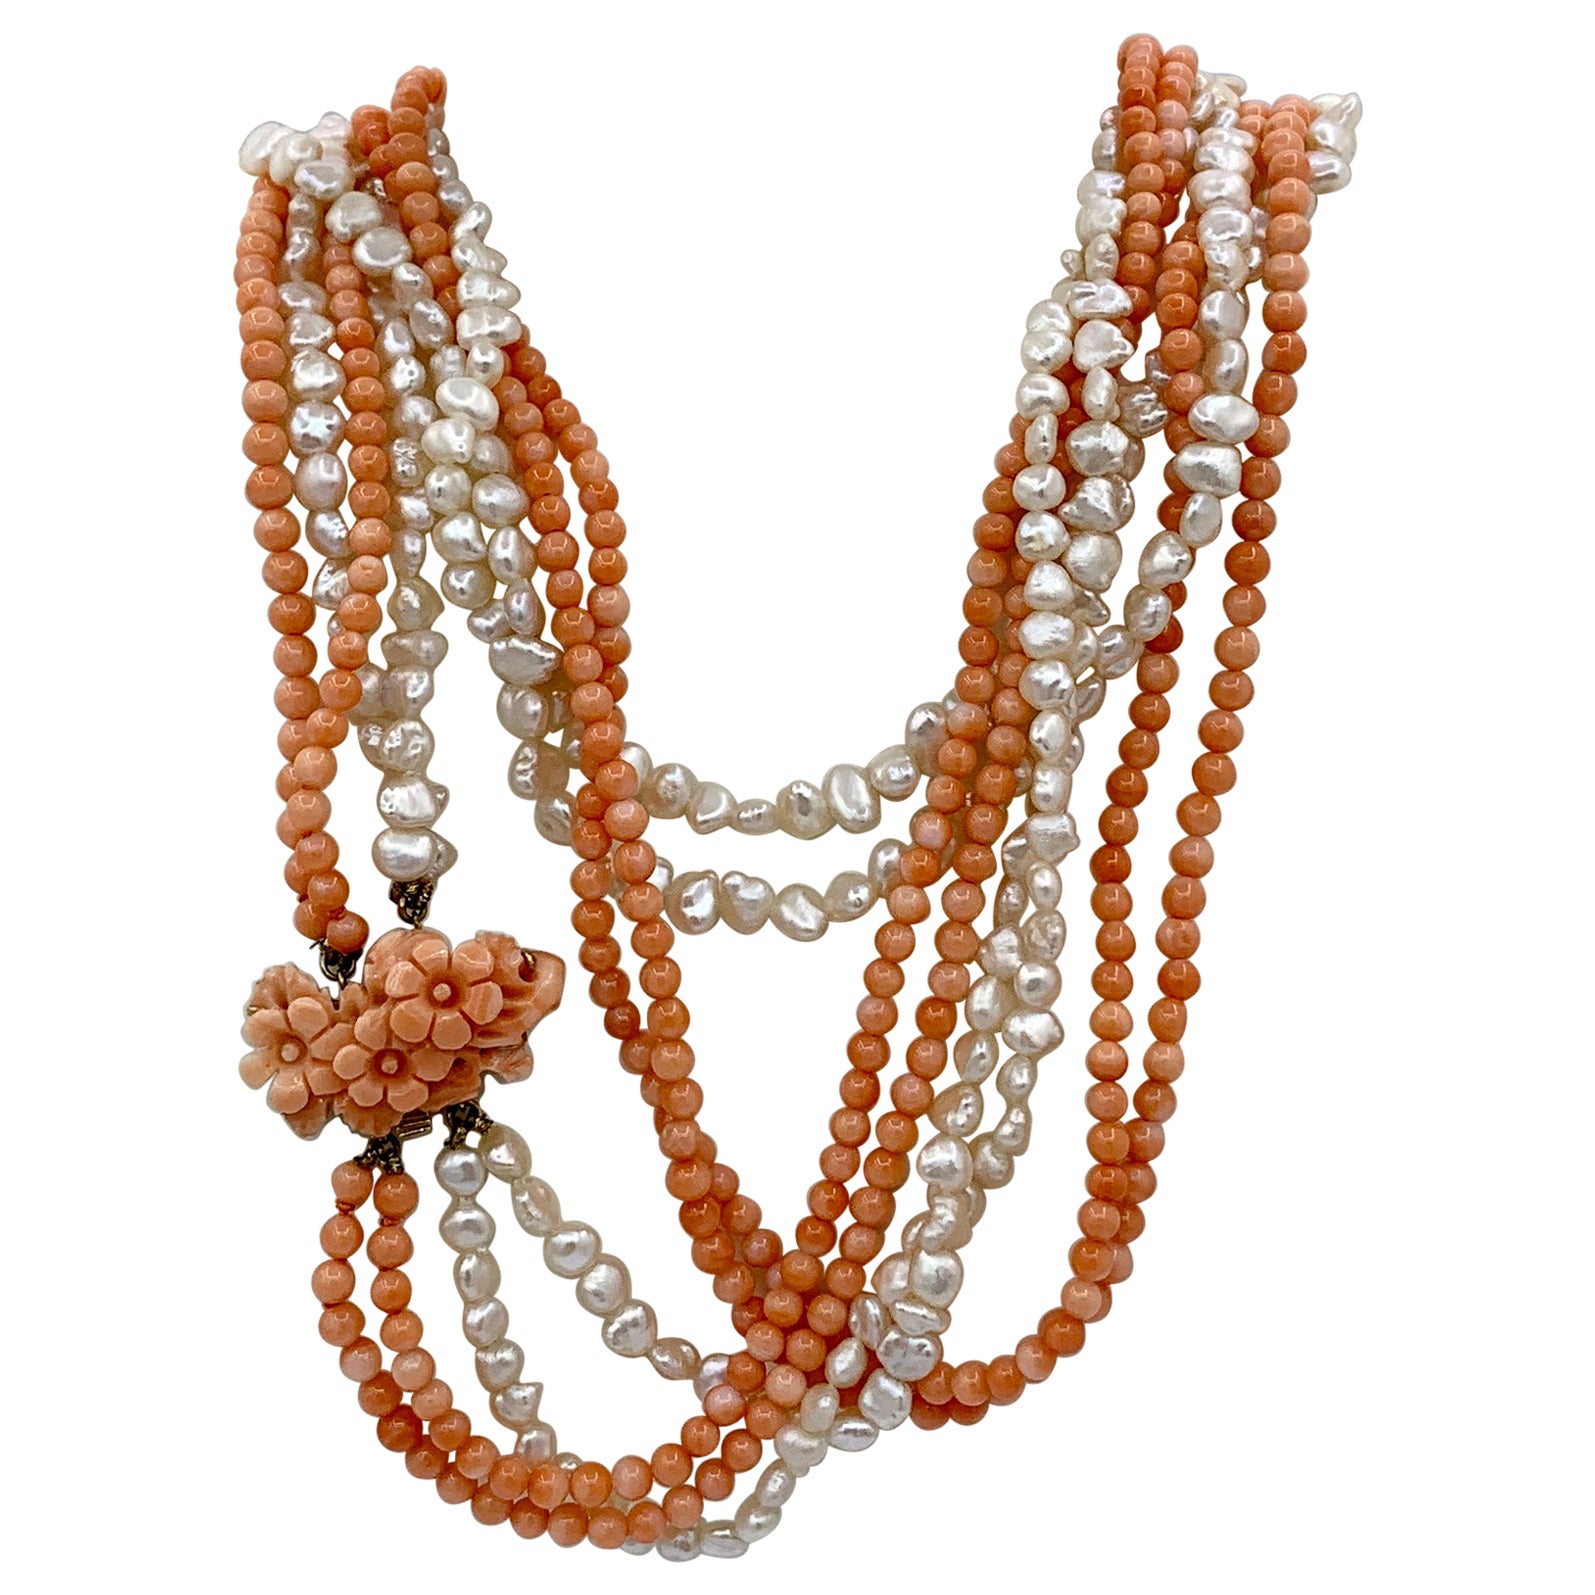 32 Inch Coral Flower Pearl Necklace 14 Karat Gold 4 Strand Hand Carved